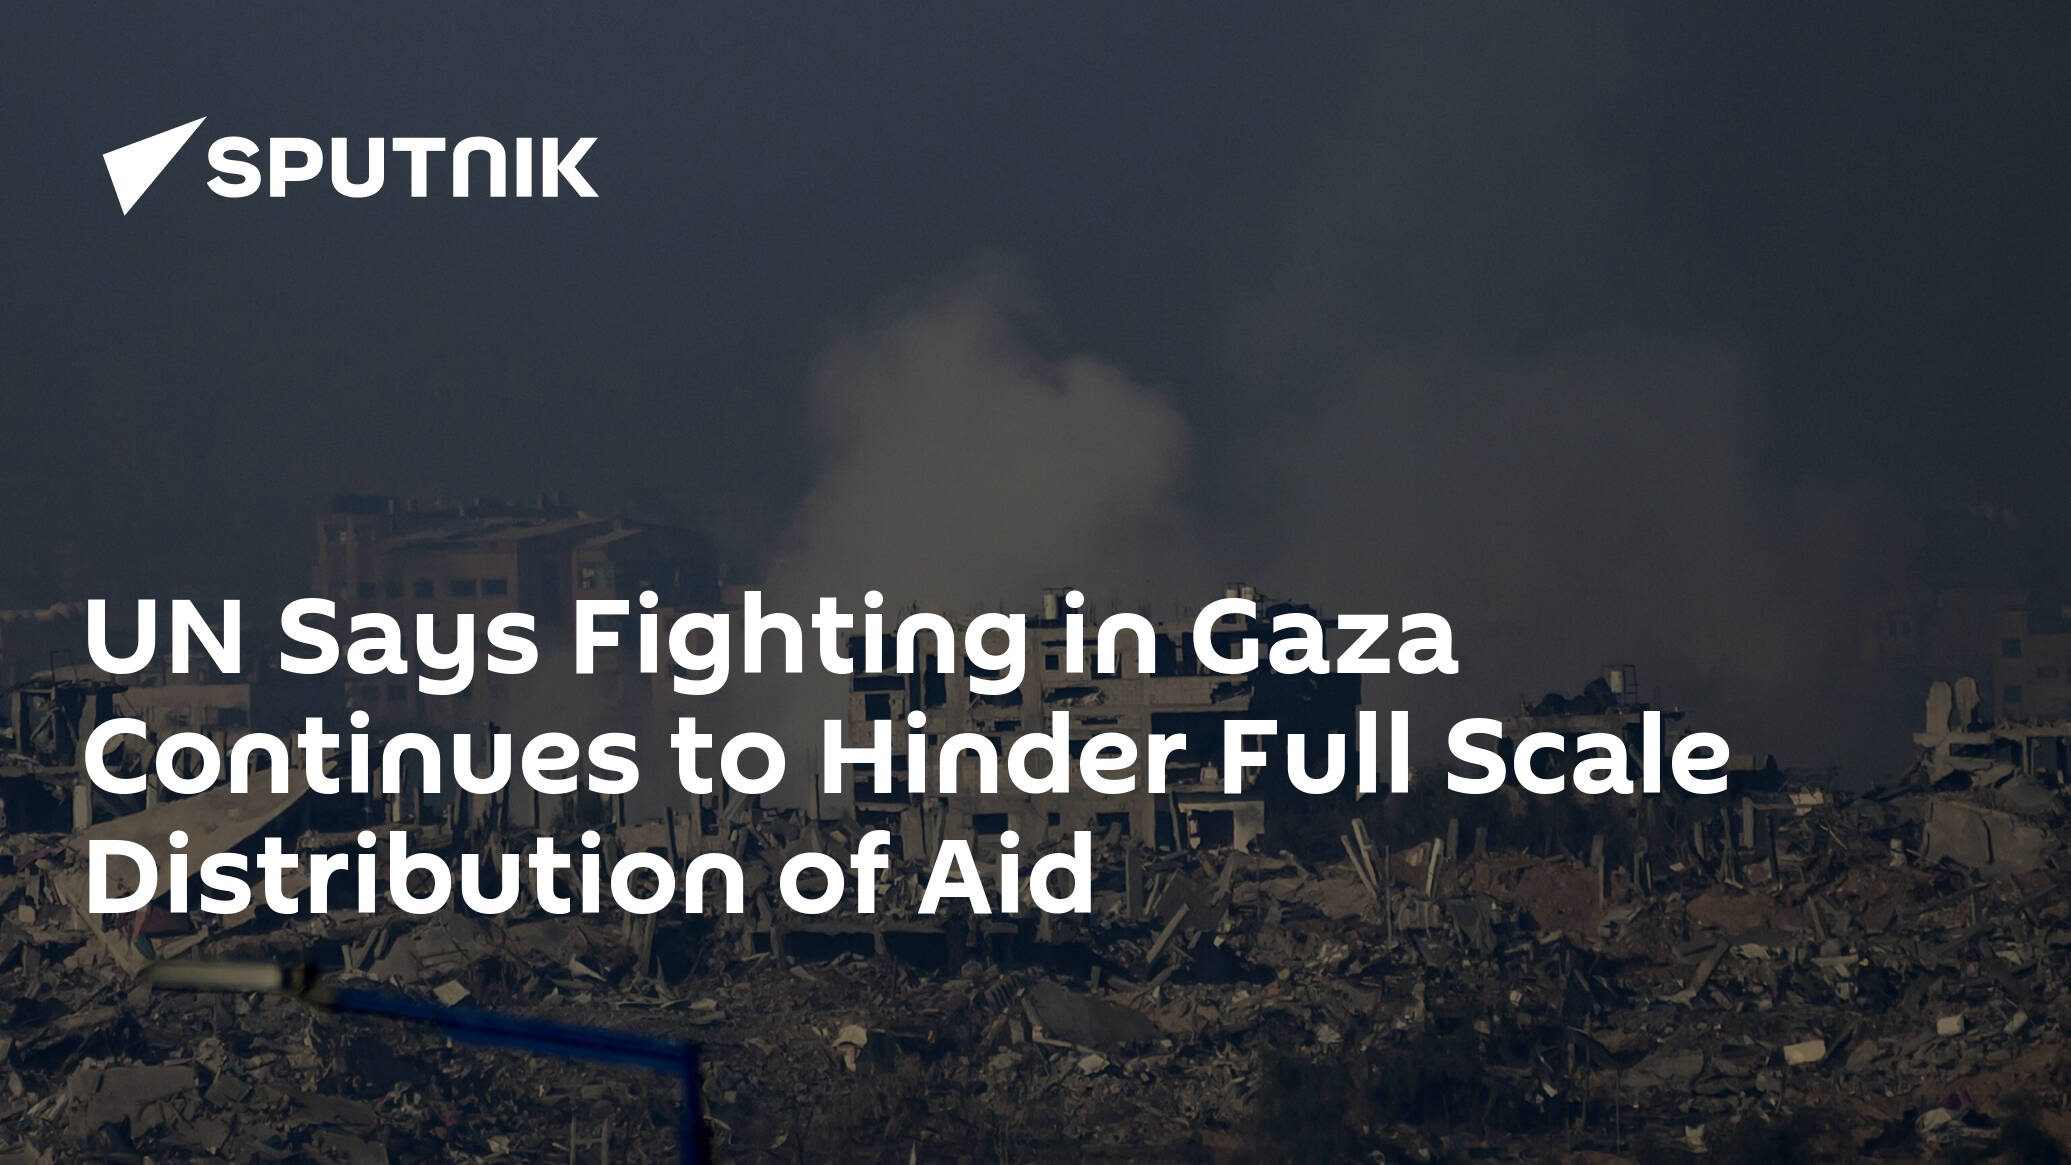 UN Says Fighting in Gaza Continues to Hinder Full Scale Distribution of Aid